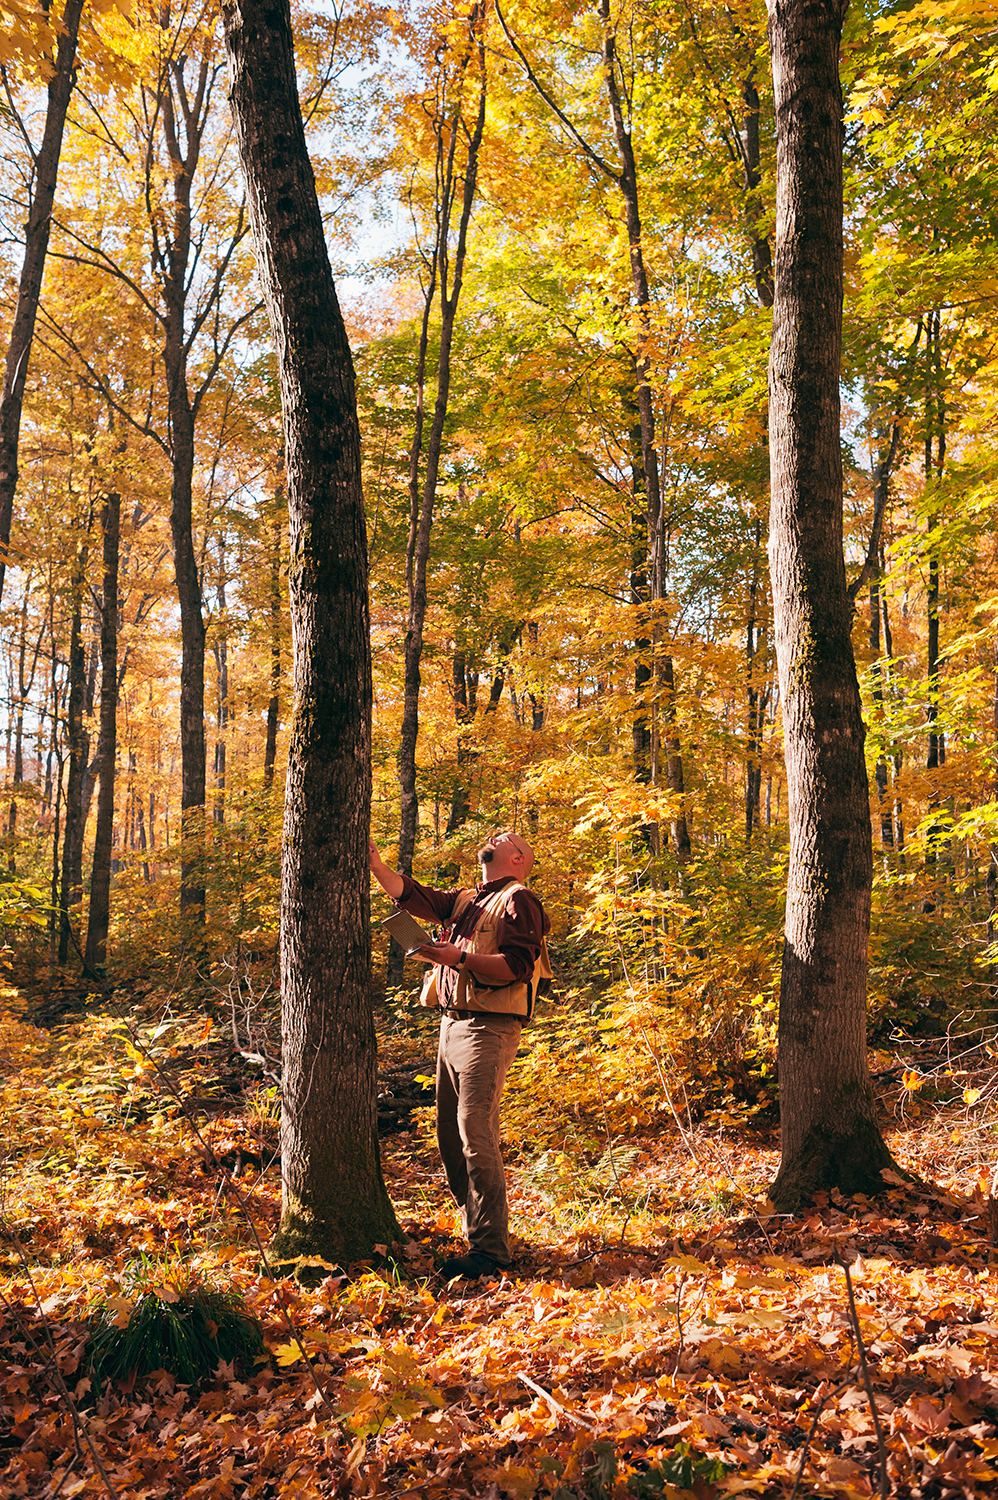 A forester stands in a forest and examines a tree.